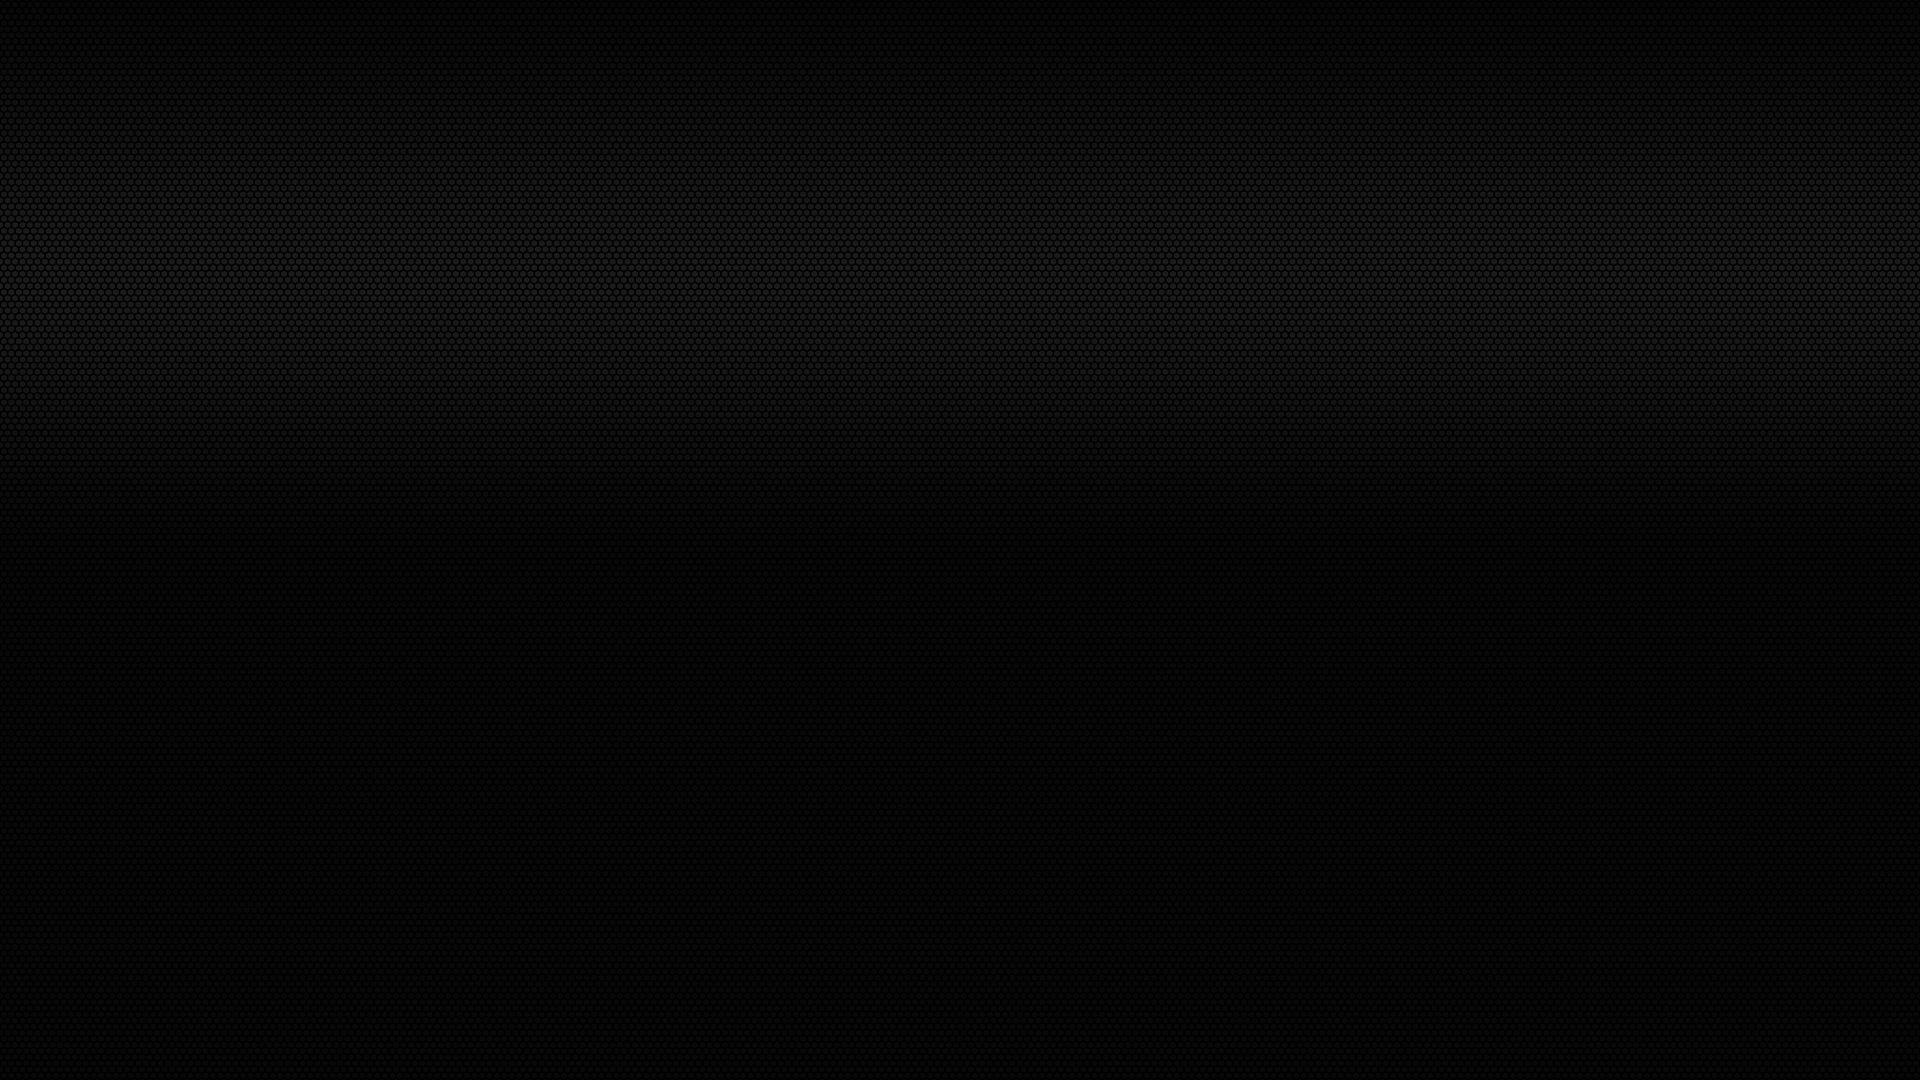 amoled solid black wallpapers wallpaper cave on solid black wallpaper